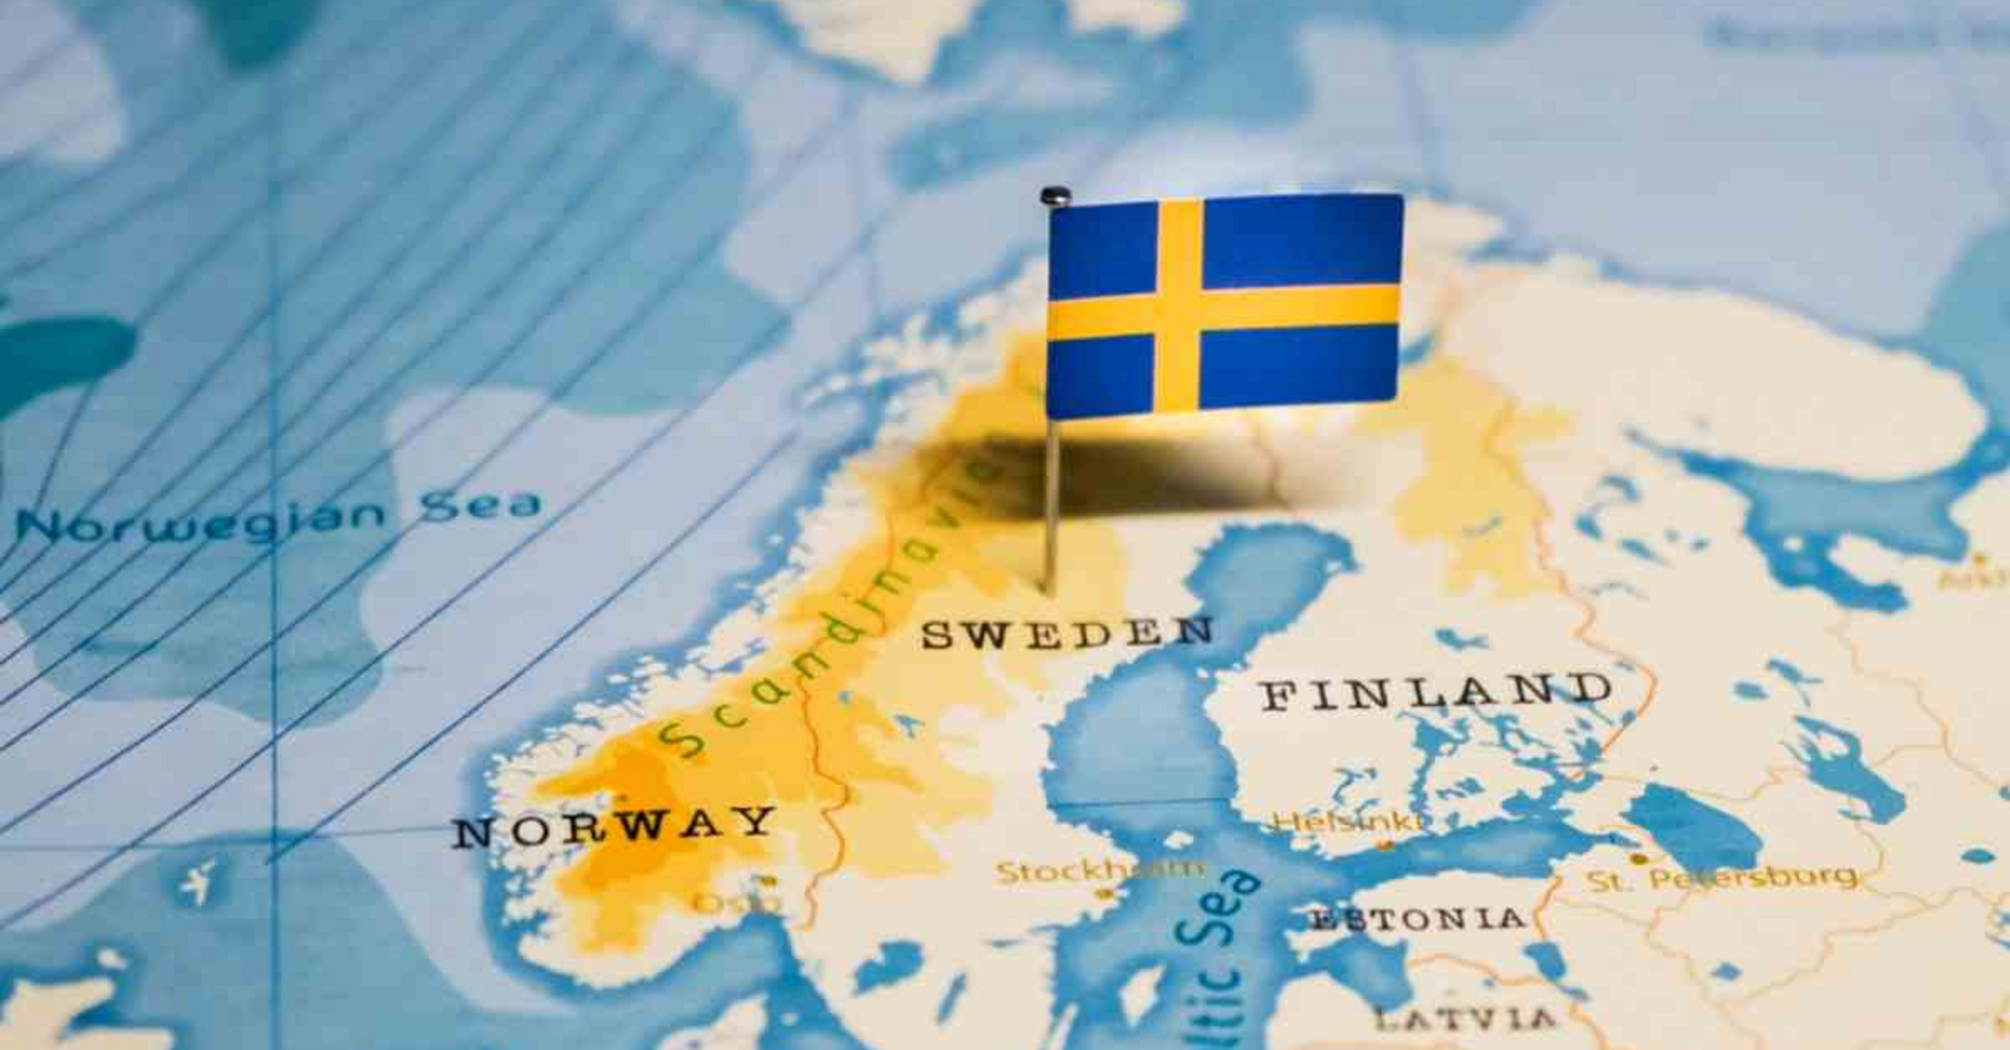 5 fascinating facts about Sweden